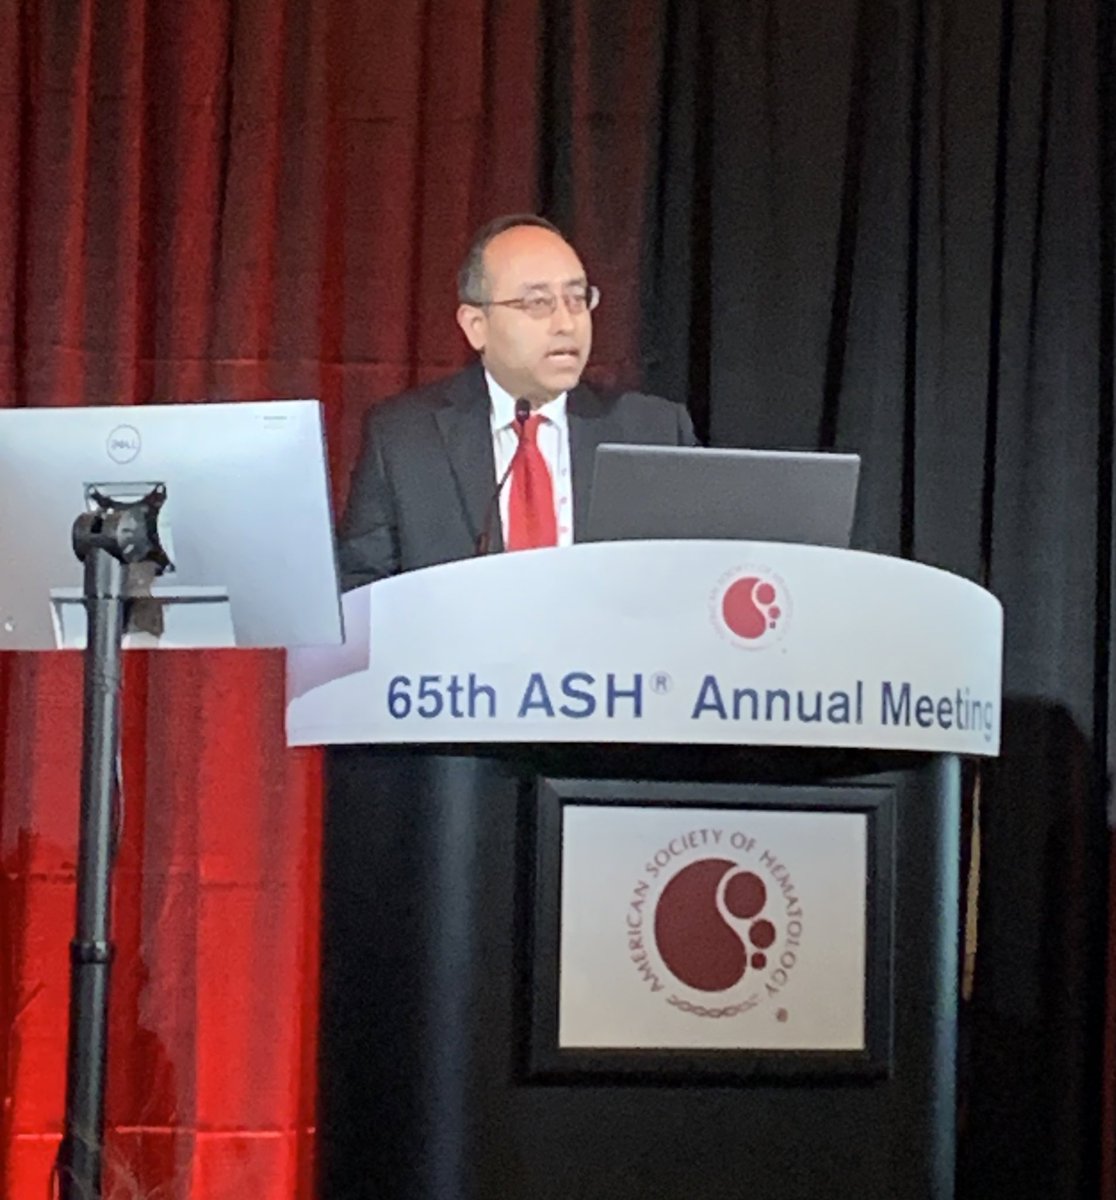 The targeted therapy bezuclastinib reduces disease burden and improves symptoms for patients with system mastocytosis, according to findings presented by our Dr. Prithviraj Bose at #ASH23 (Abstract 77). Learn about it here: bit.ly/487o6zk @bose_prithviraj @ASH_hematology…